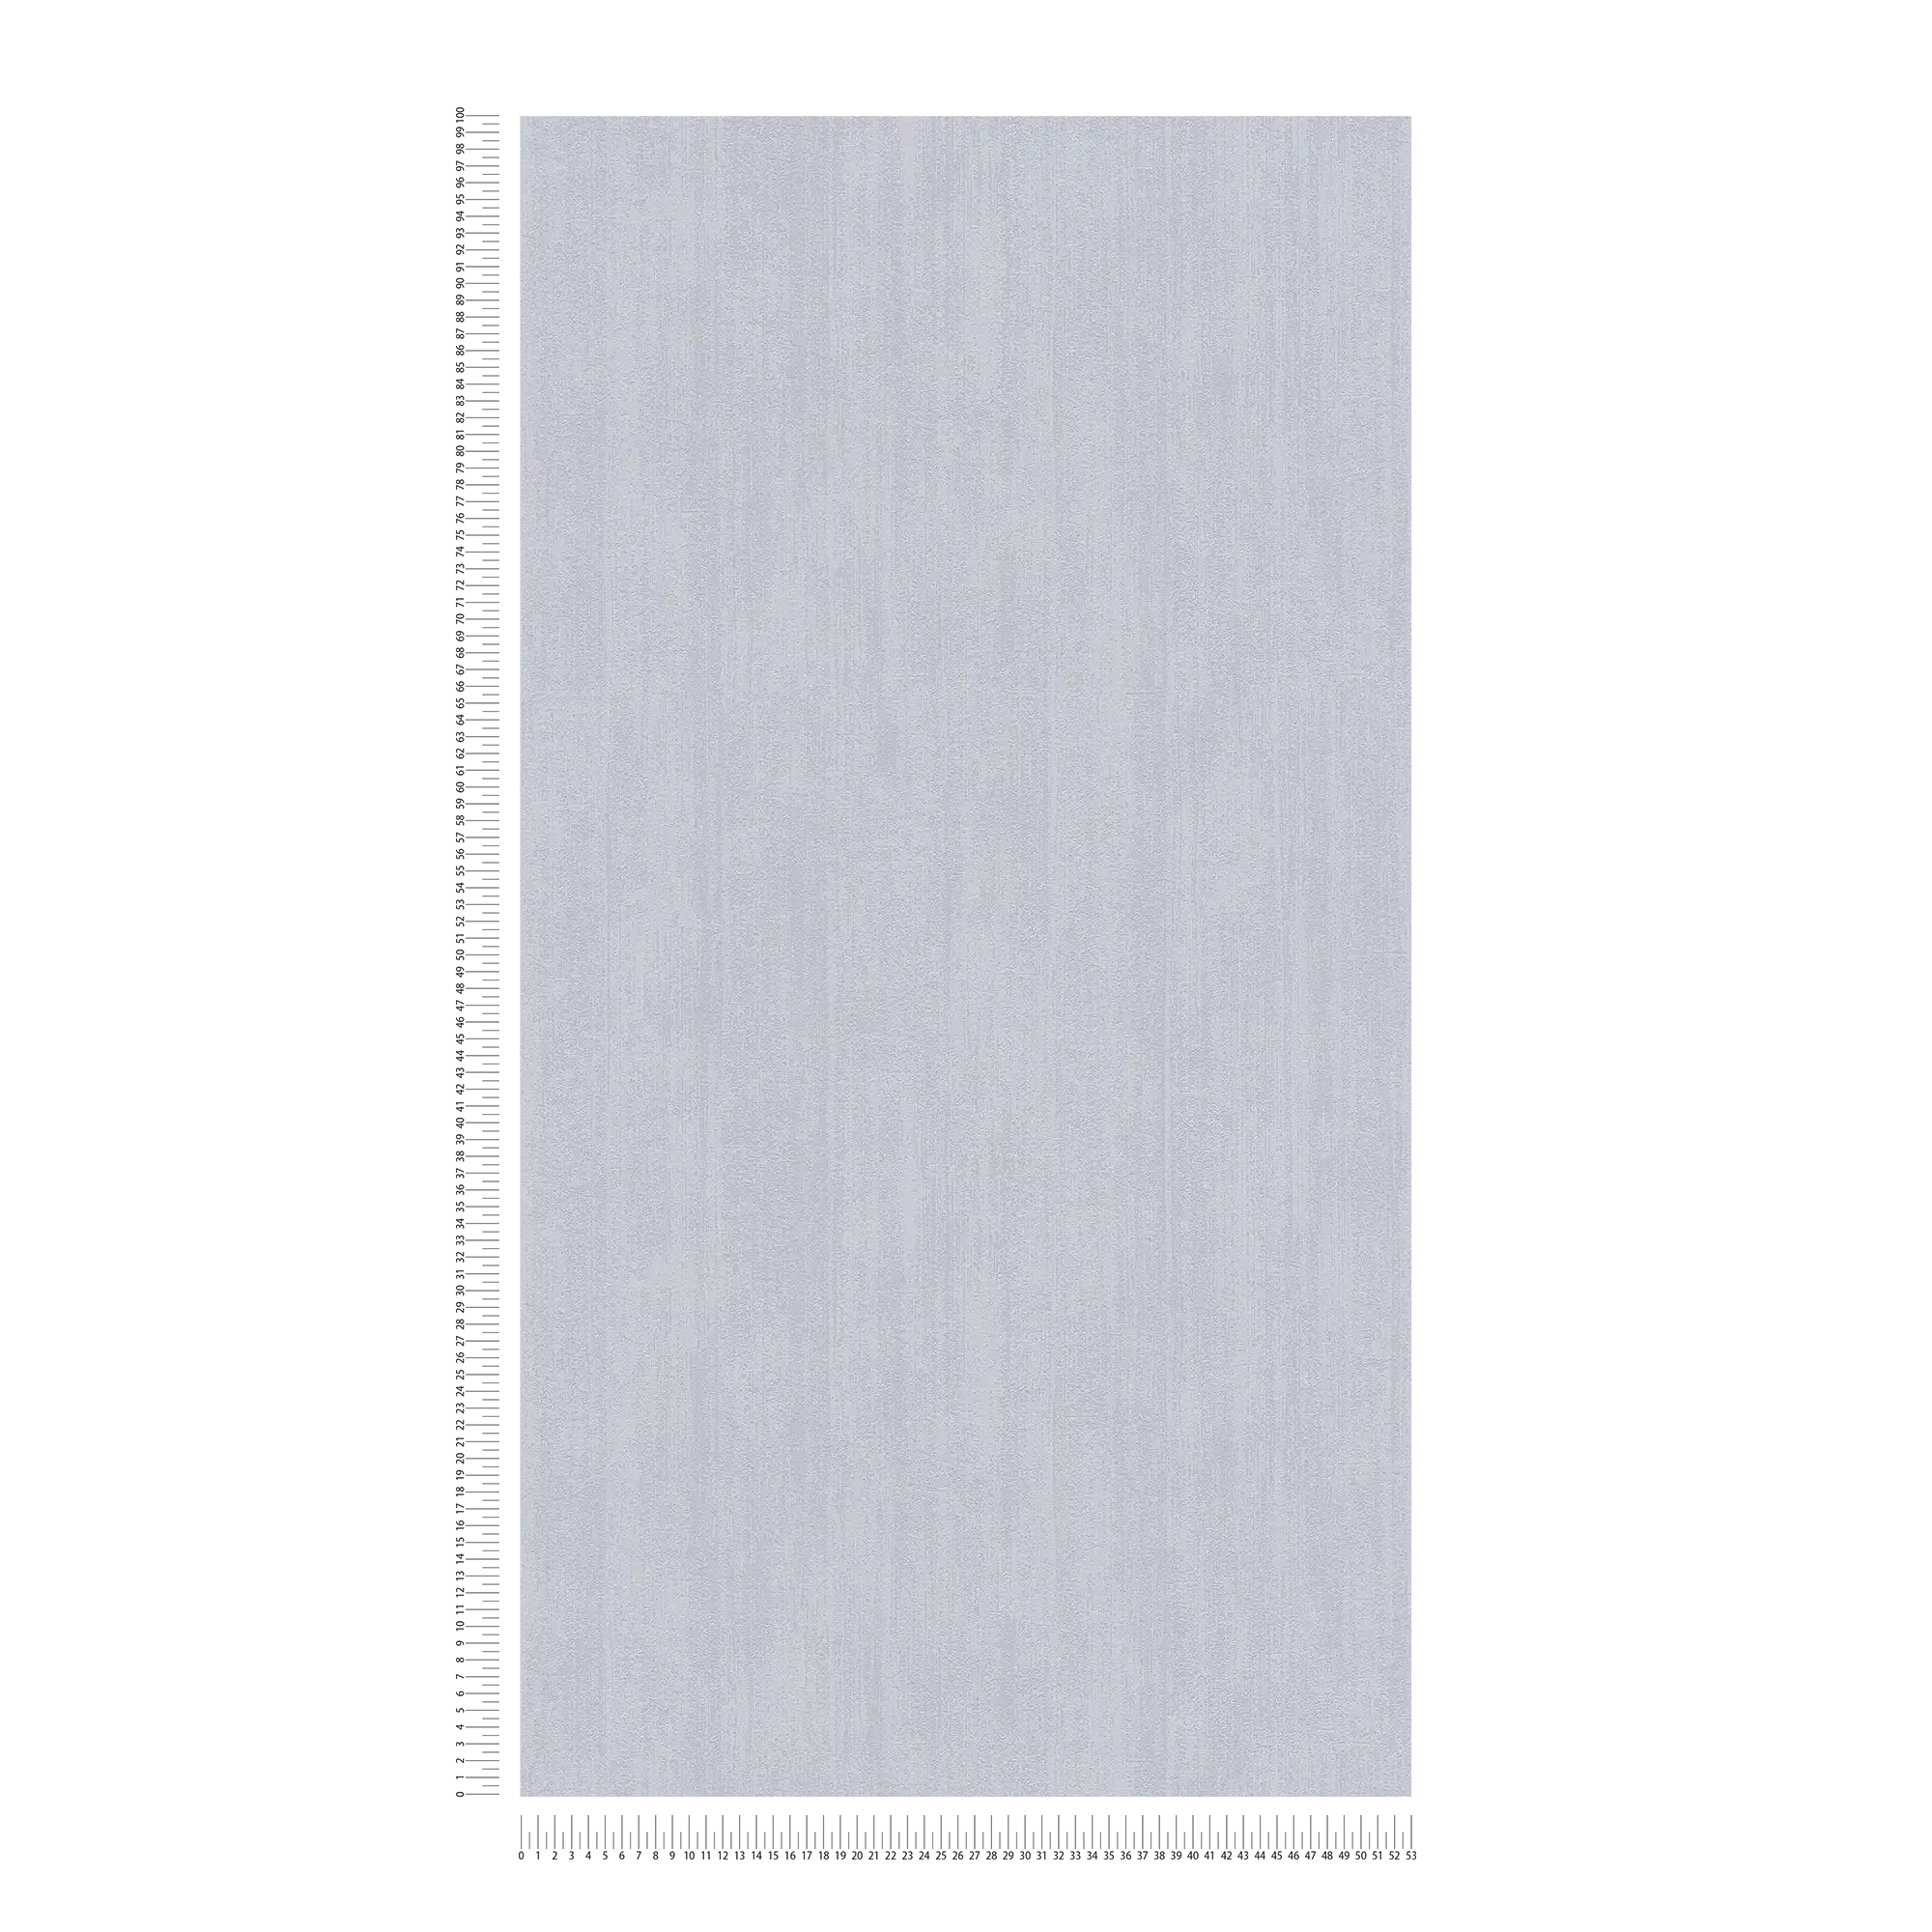             Plain non-woven wallpaper with tone-on-tone hatching - grey
        